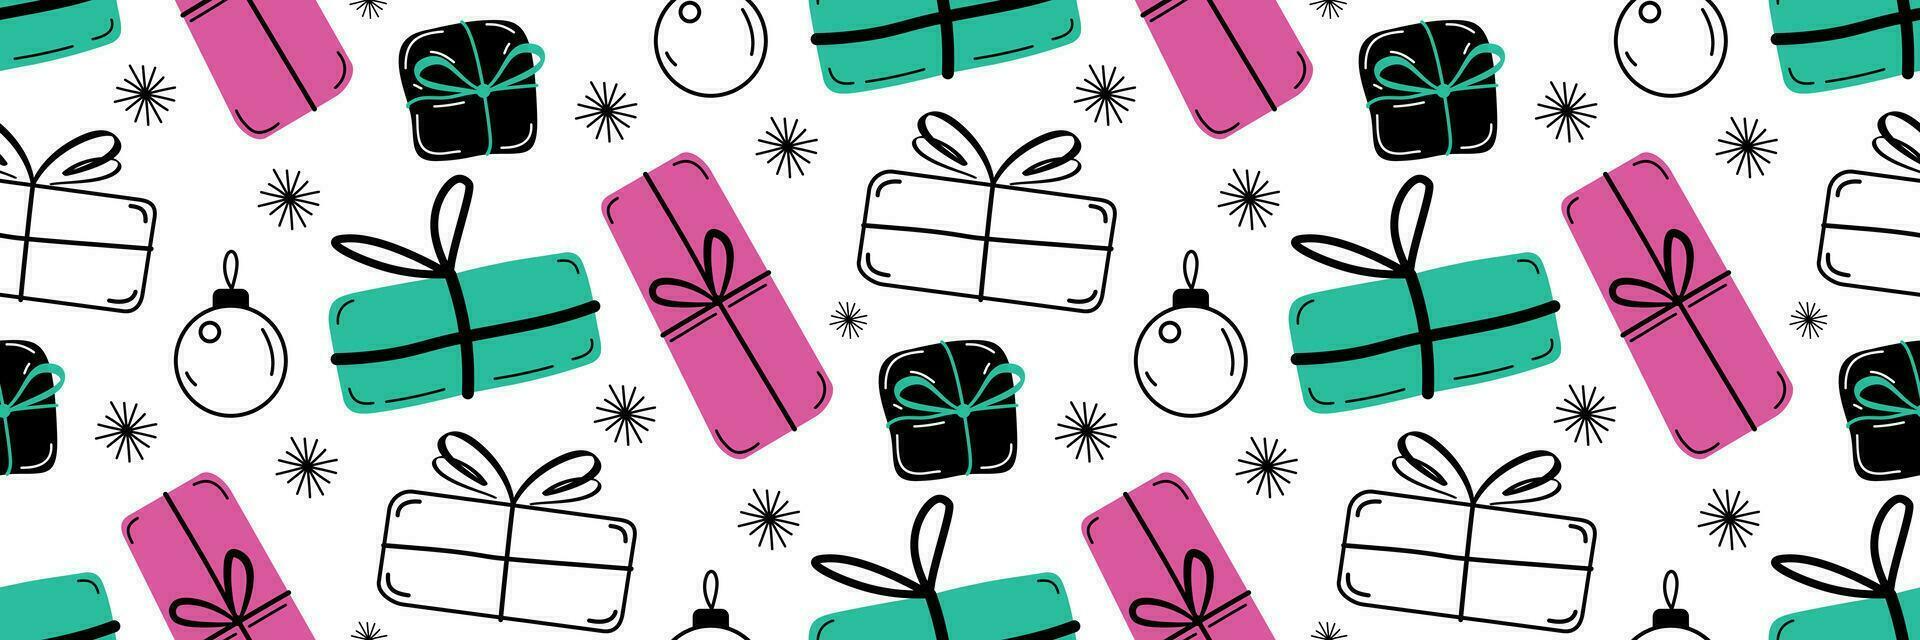 Hand drawn Christmas seamless pattern. New year gifts vector illustration. Holiday paper, printing on wrapping paper, wallpaper or fabric.